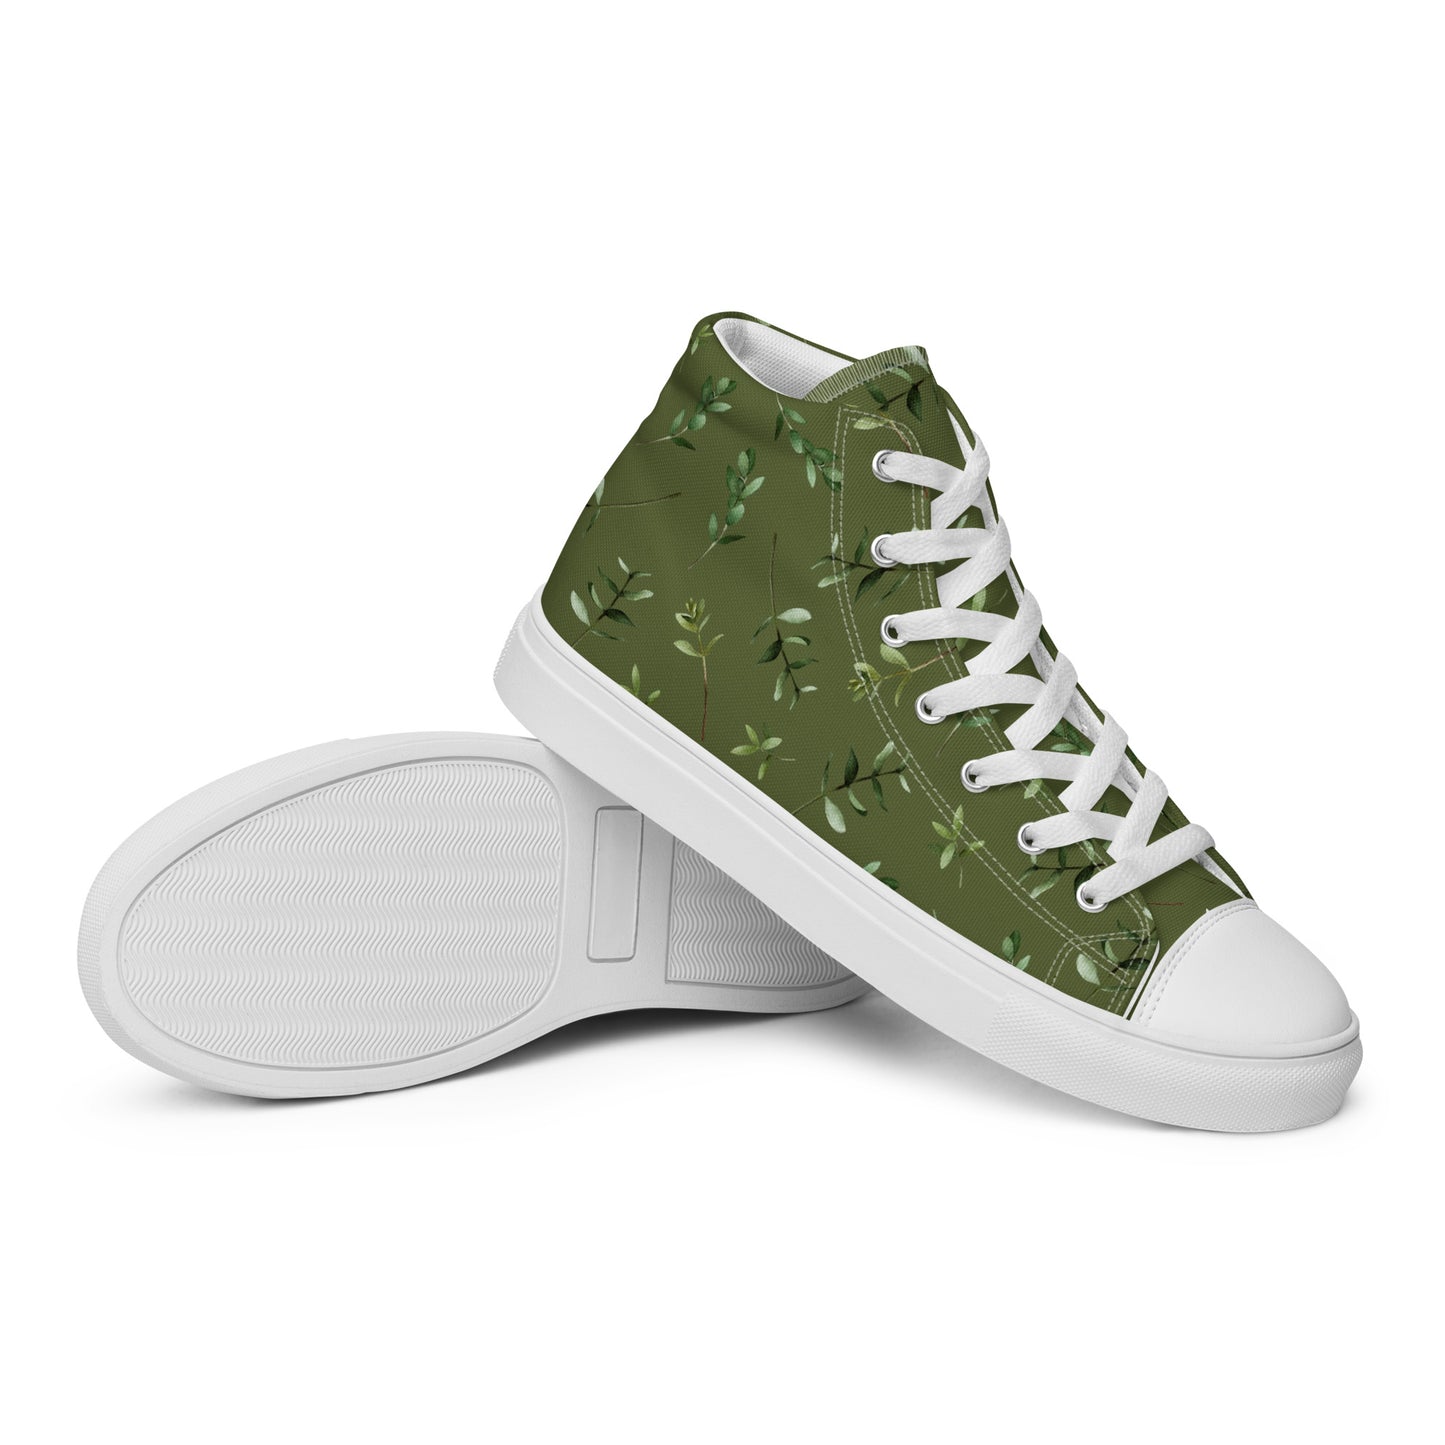 Greenery Wood Green Women’s High Top Canvas Shoes